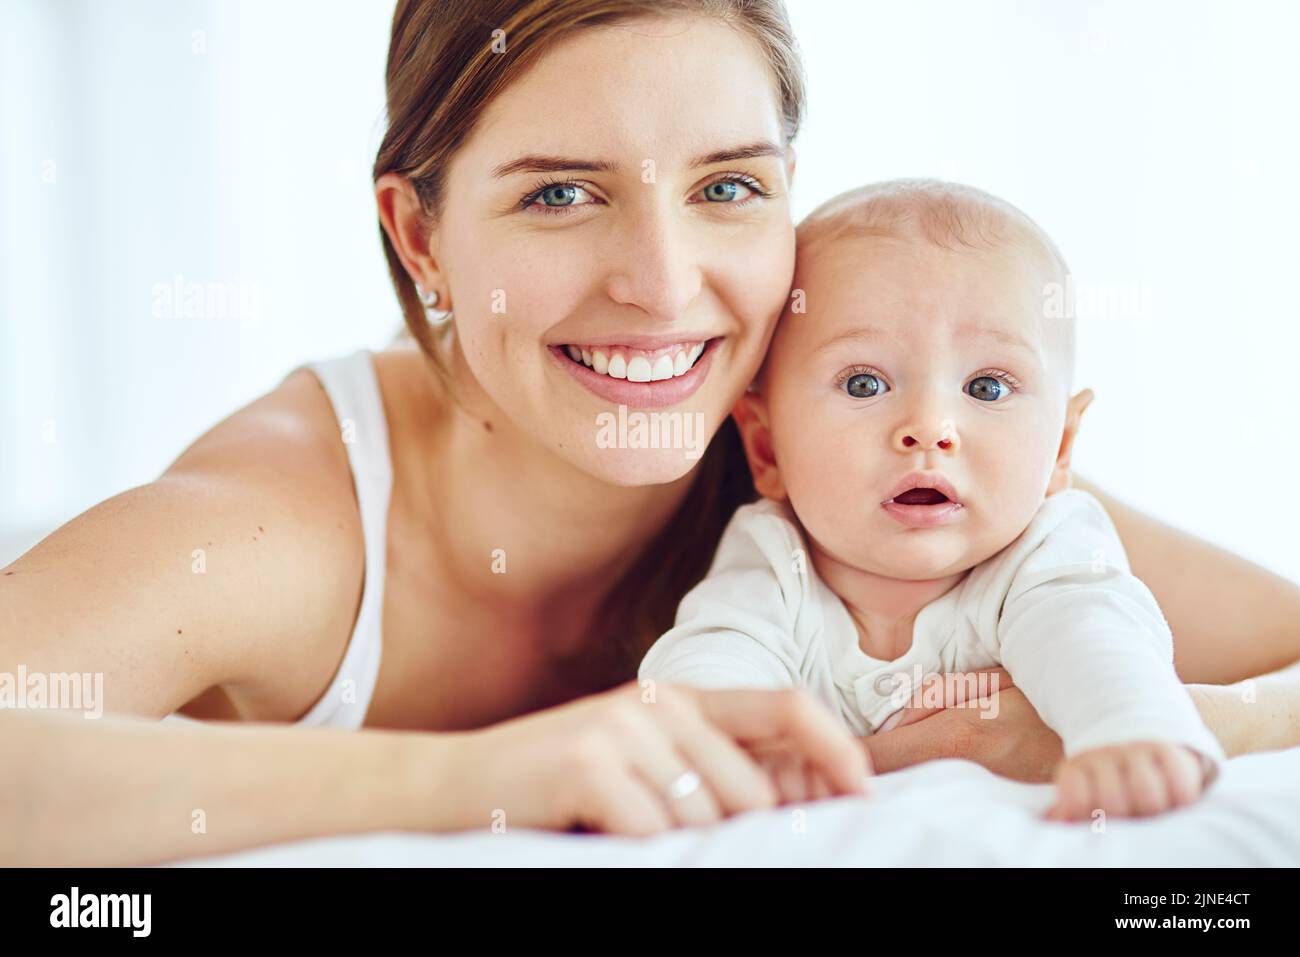 Portrait of happy and loving mother bonding with her cute baby boy at home while enjoying parenthood. Single parent being playful and affectionate Stock Photo